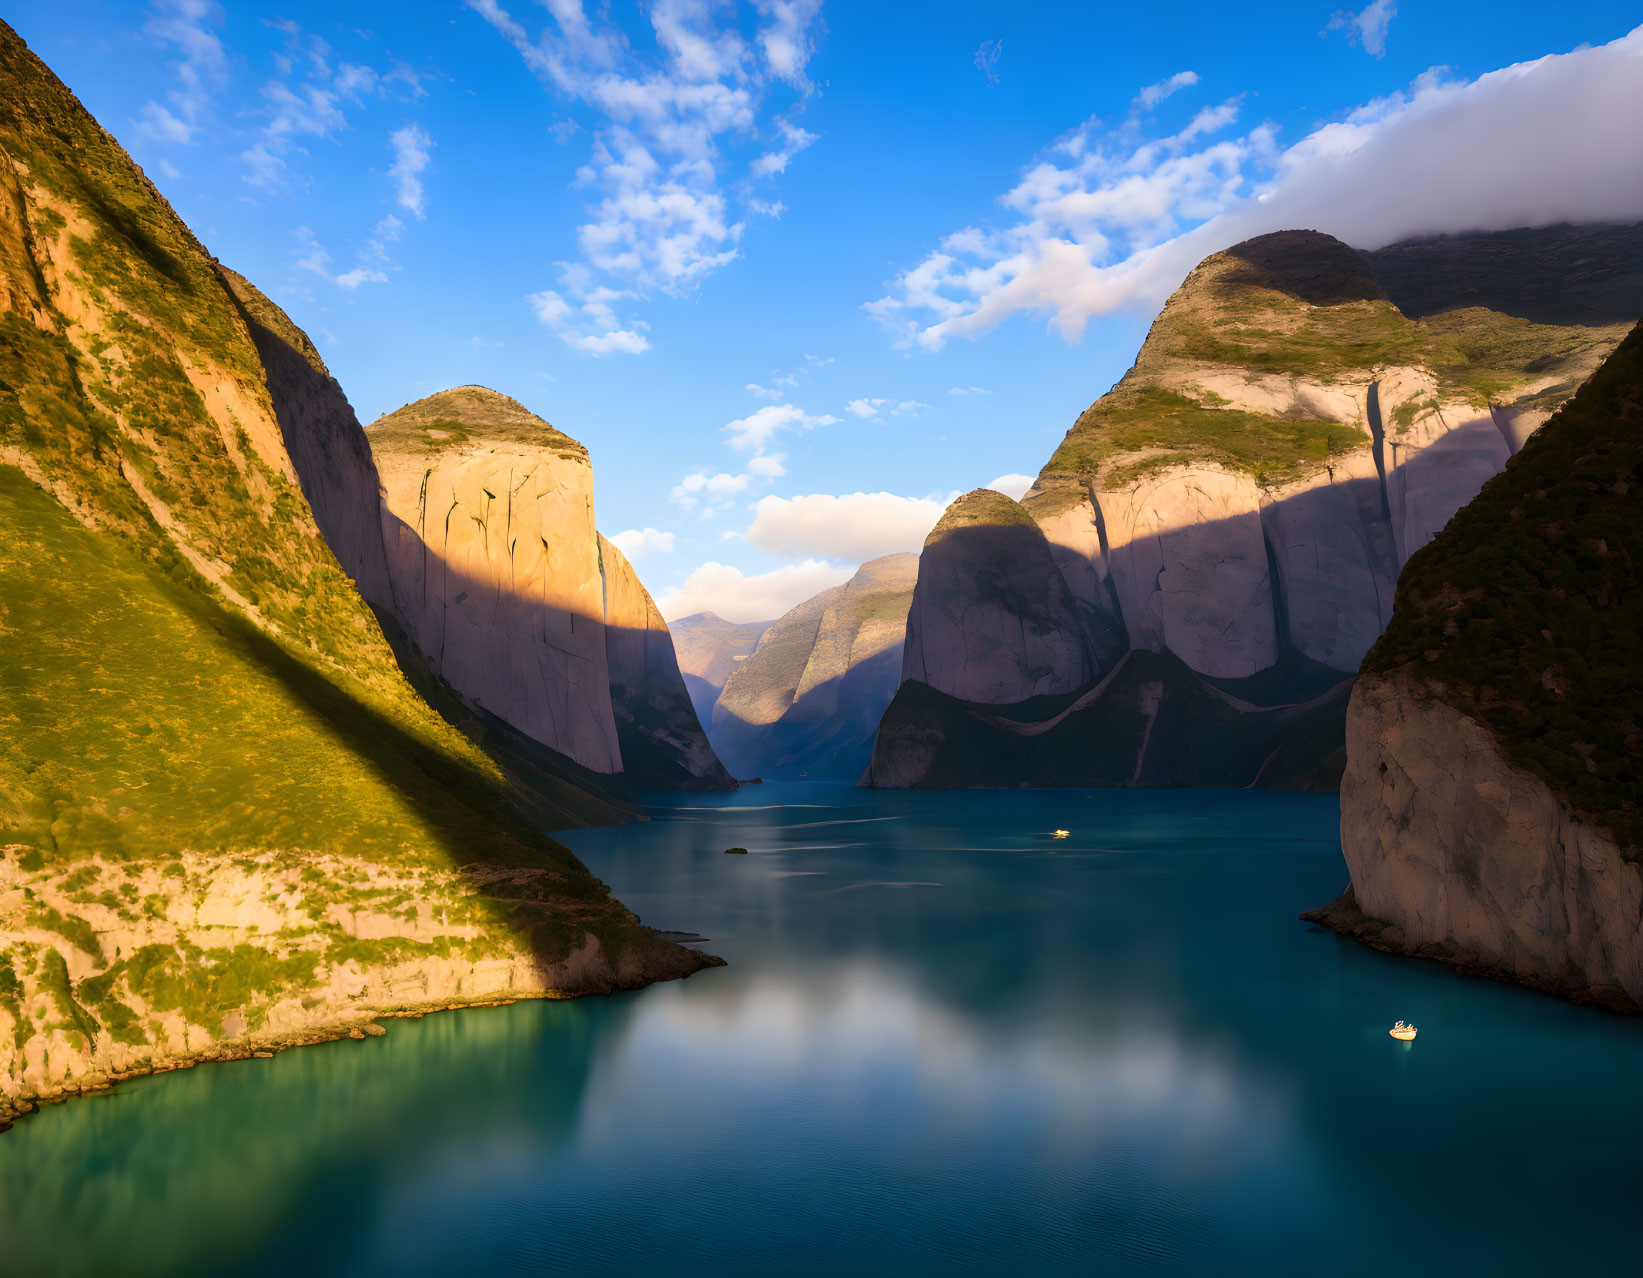 Tranquil Lake Scene with Boats, Cliffs, and Blue Sky